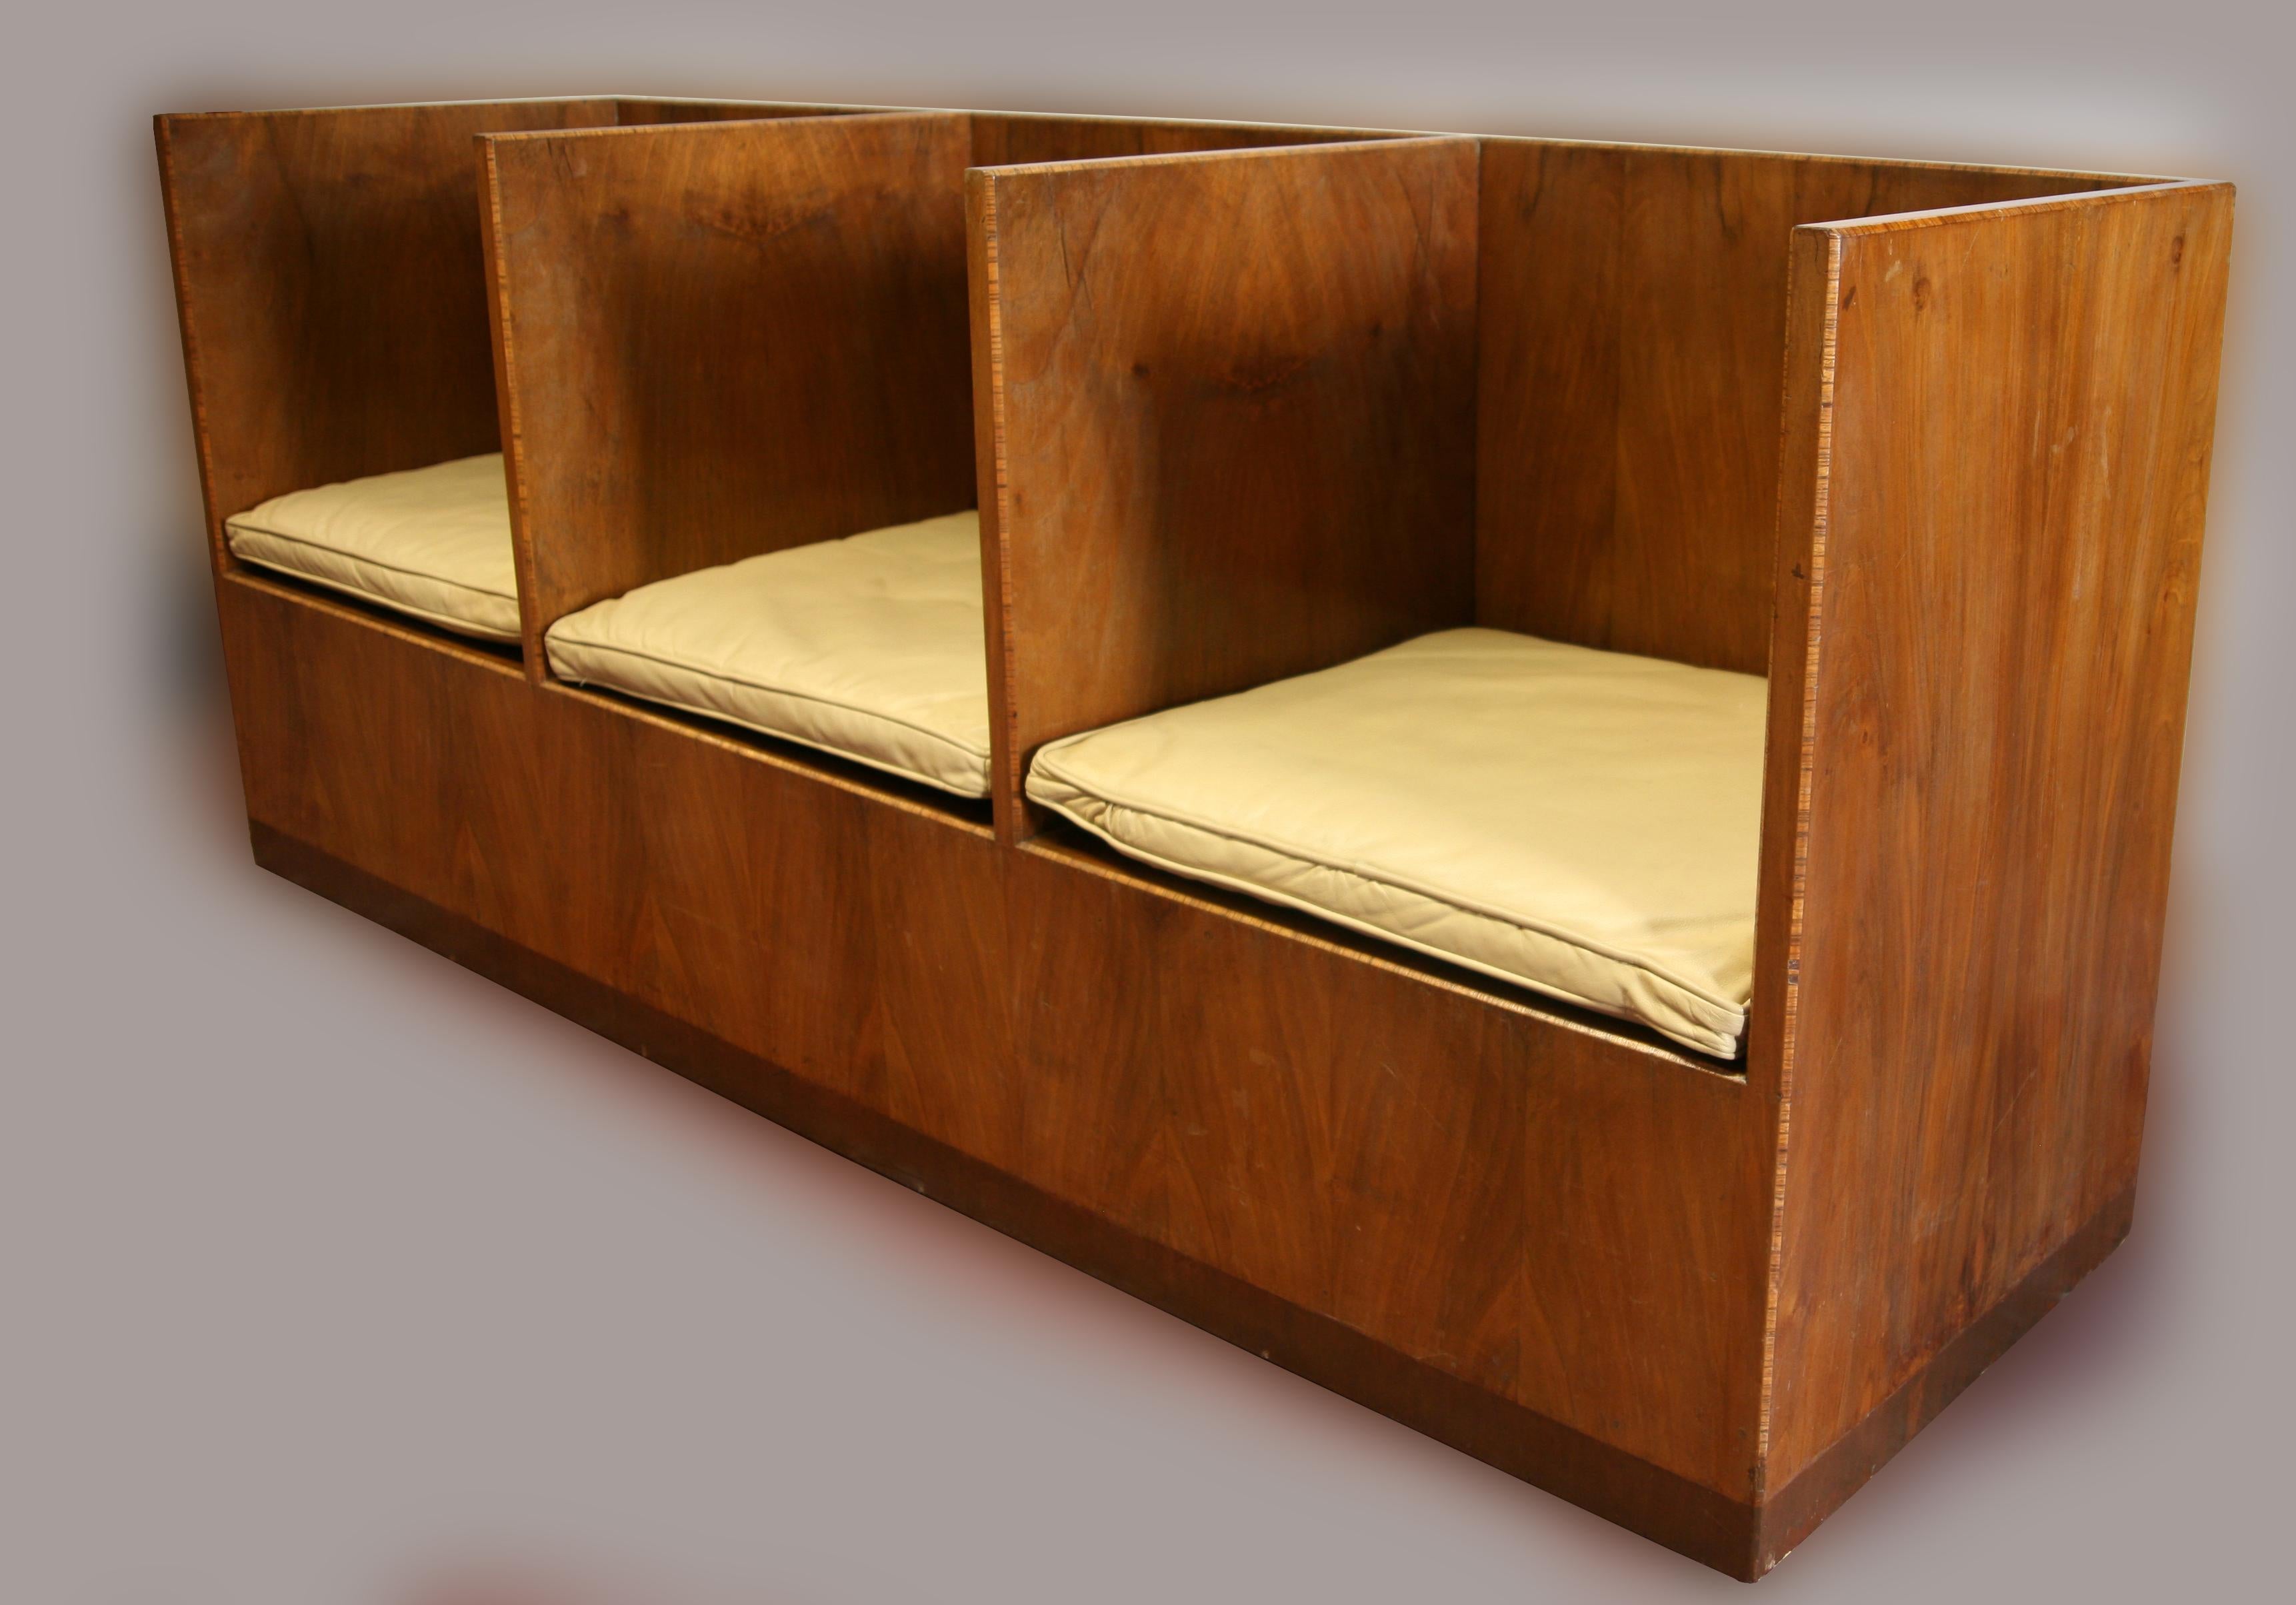 Midcentury triple-seat in walnut. The arms in divisions beautifully crossbanded, circa 1950.

Measurements:
84 inches 214 cms length
Depth: 24 inches or 61 cms
Height of sides: 35 inches or 89cms
Height of seat (without cushions) 14.5 inches